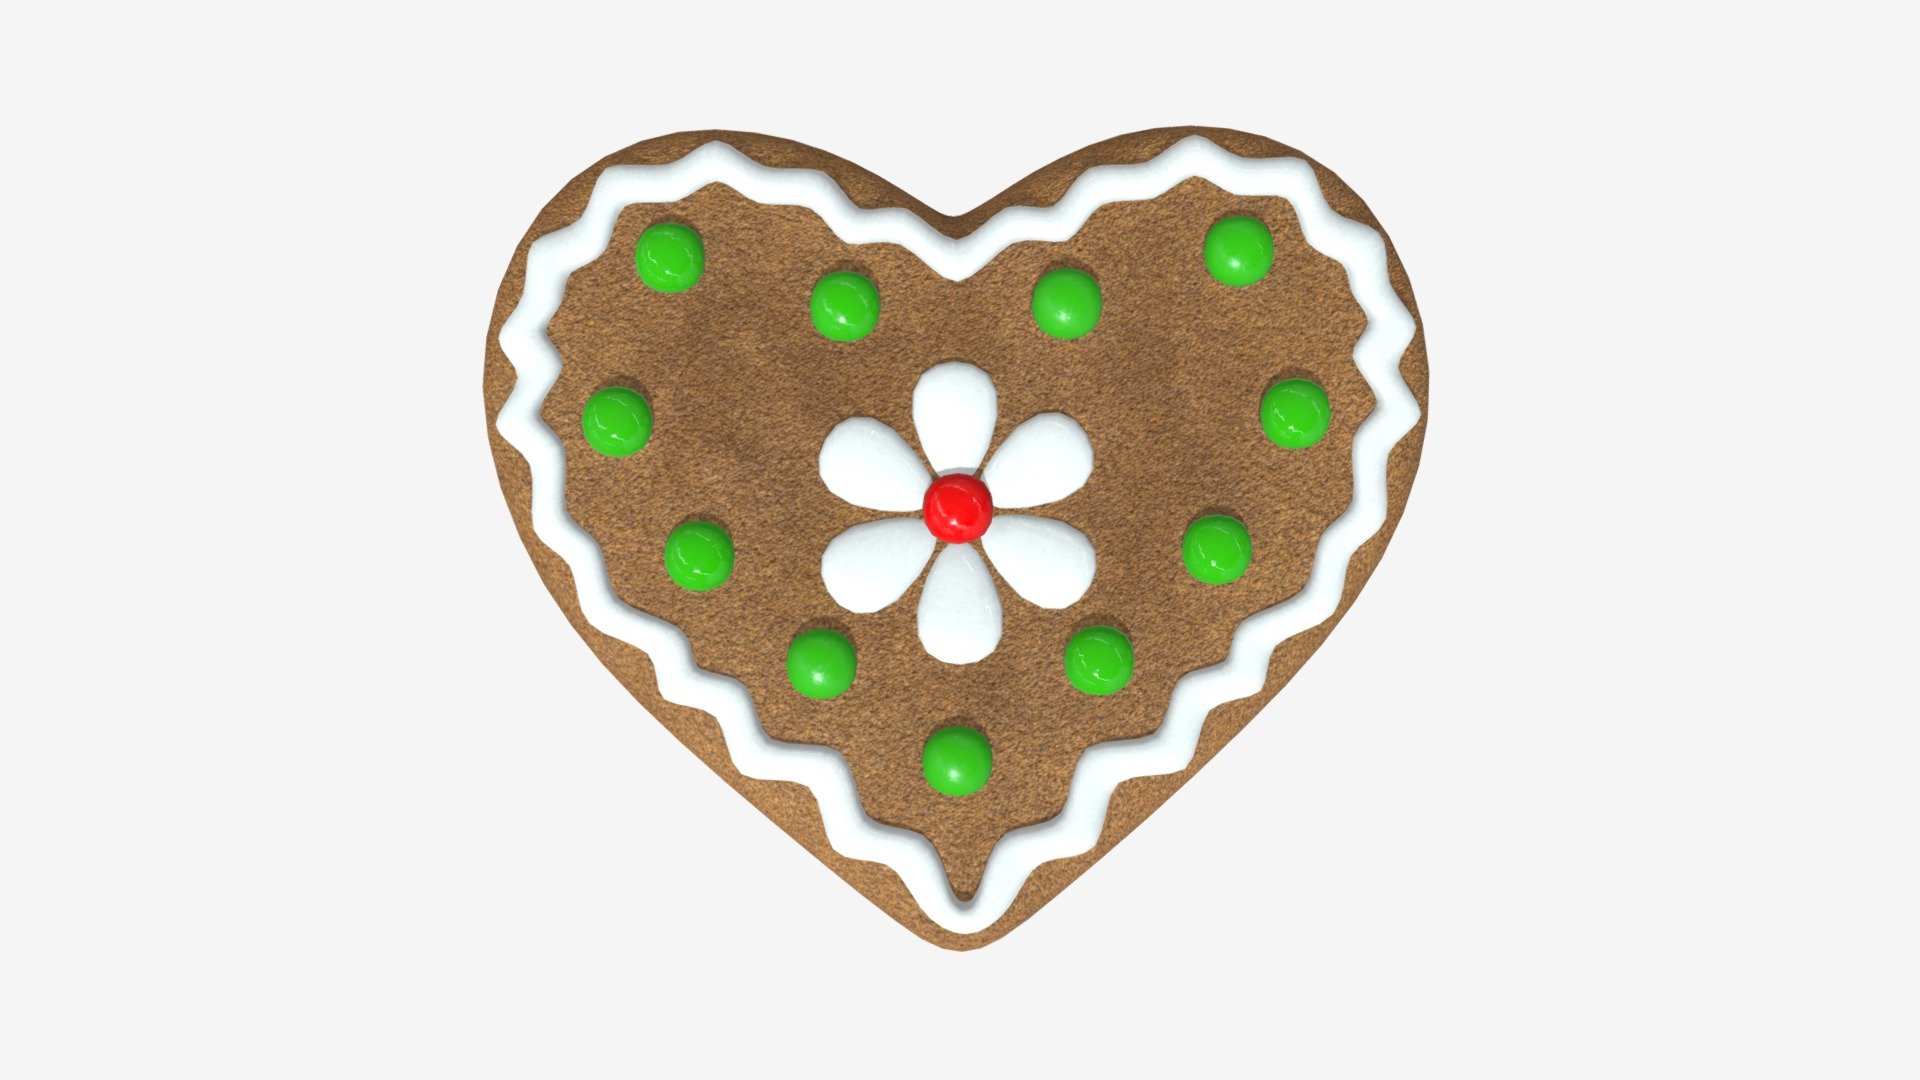 Created in 3ds max 2016
Saved to 3ds max 2013
Units: Centimeters
Dimension: 6.44 x 5.63 x 1.05
Polys: 5376
XForm: Yes
Box Trick: No
Model Parts: 1 - Gingerbread cookie 05 - Buy Royalty Free 3D model by HQ3DMOD (@AivisAstics) 3d model